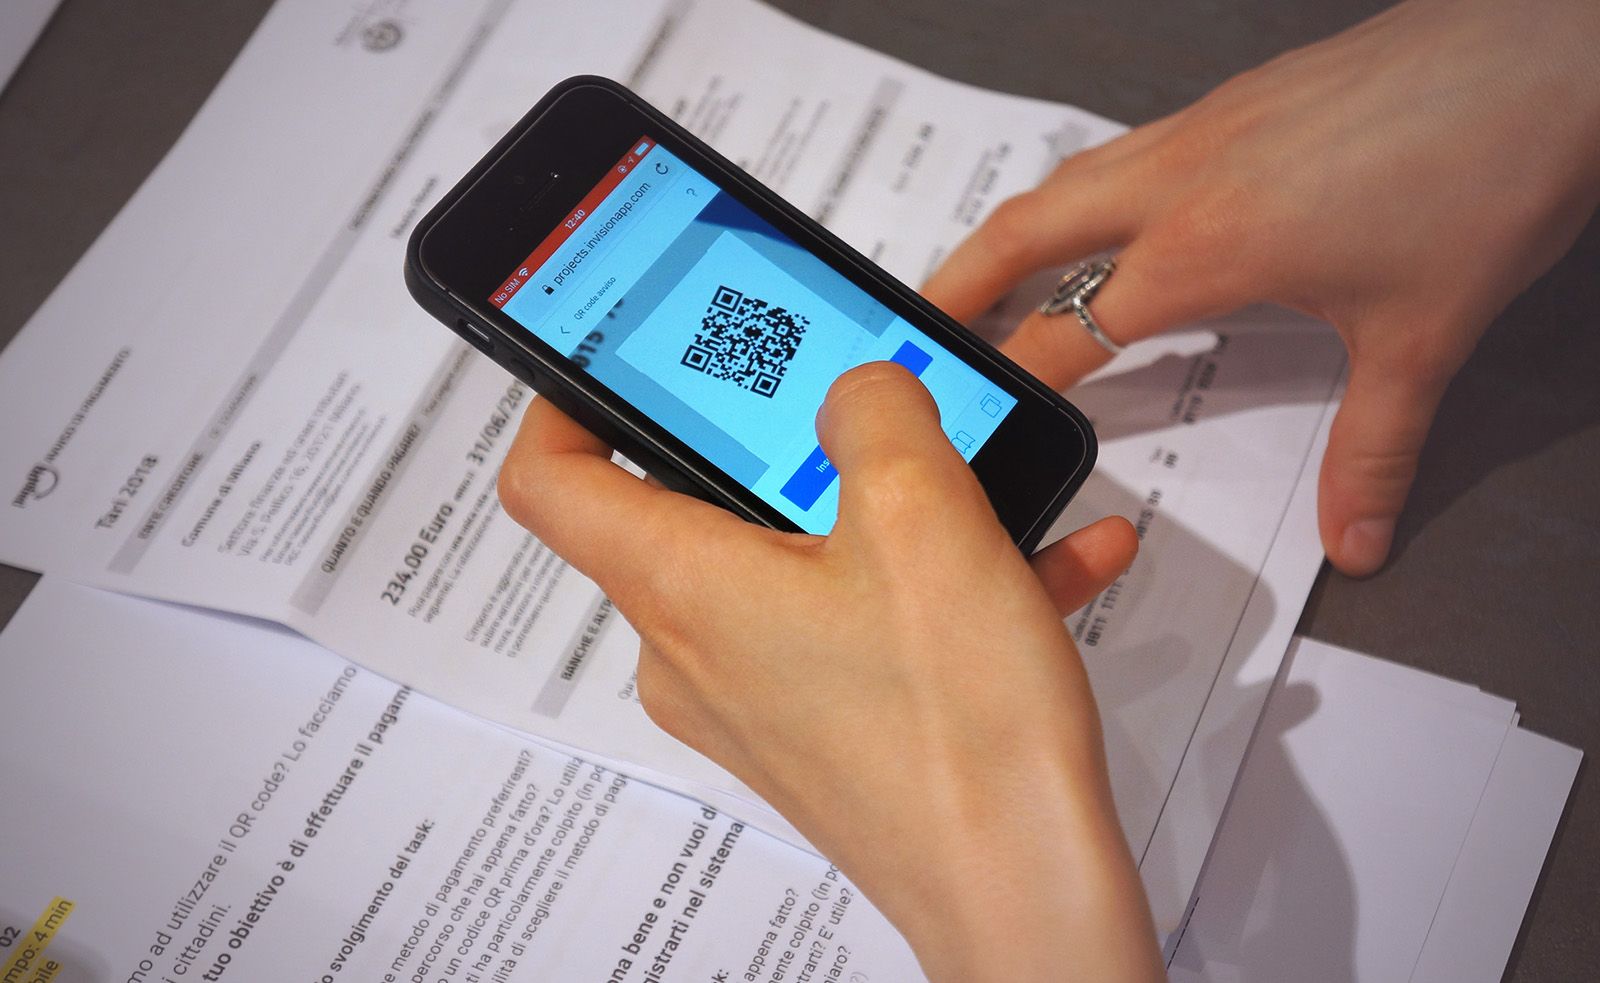 Scanning the QR code on the paper bill to start the payment flow